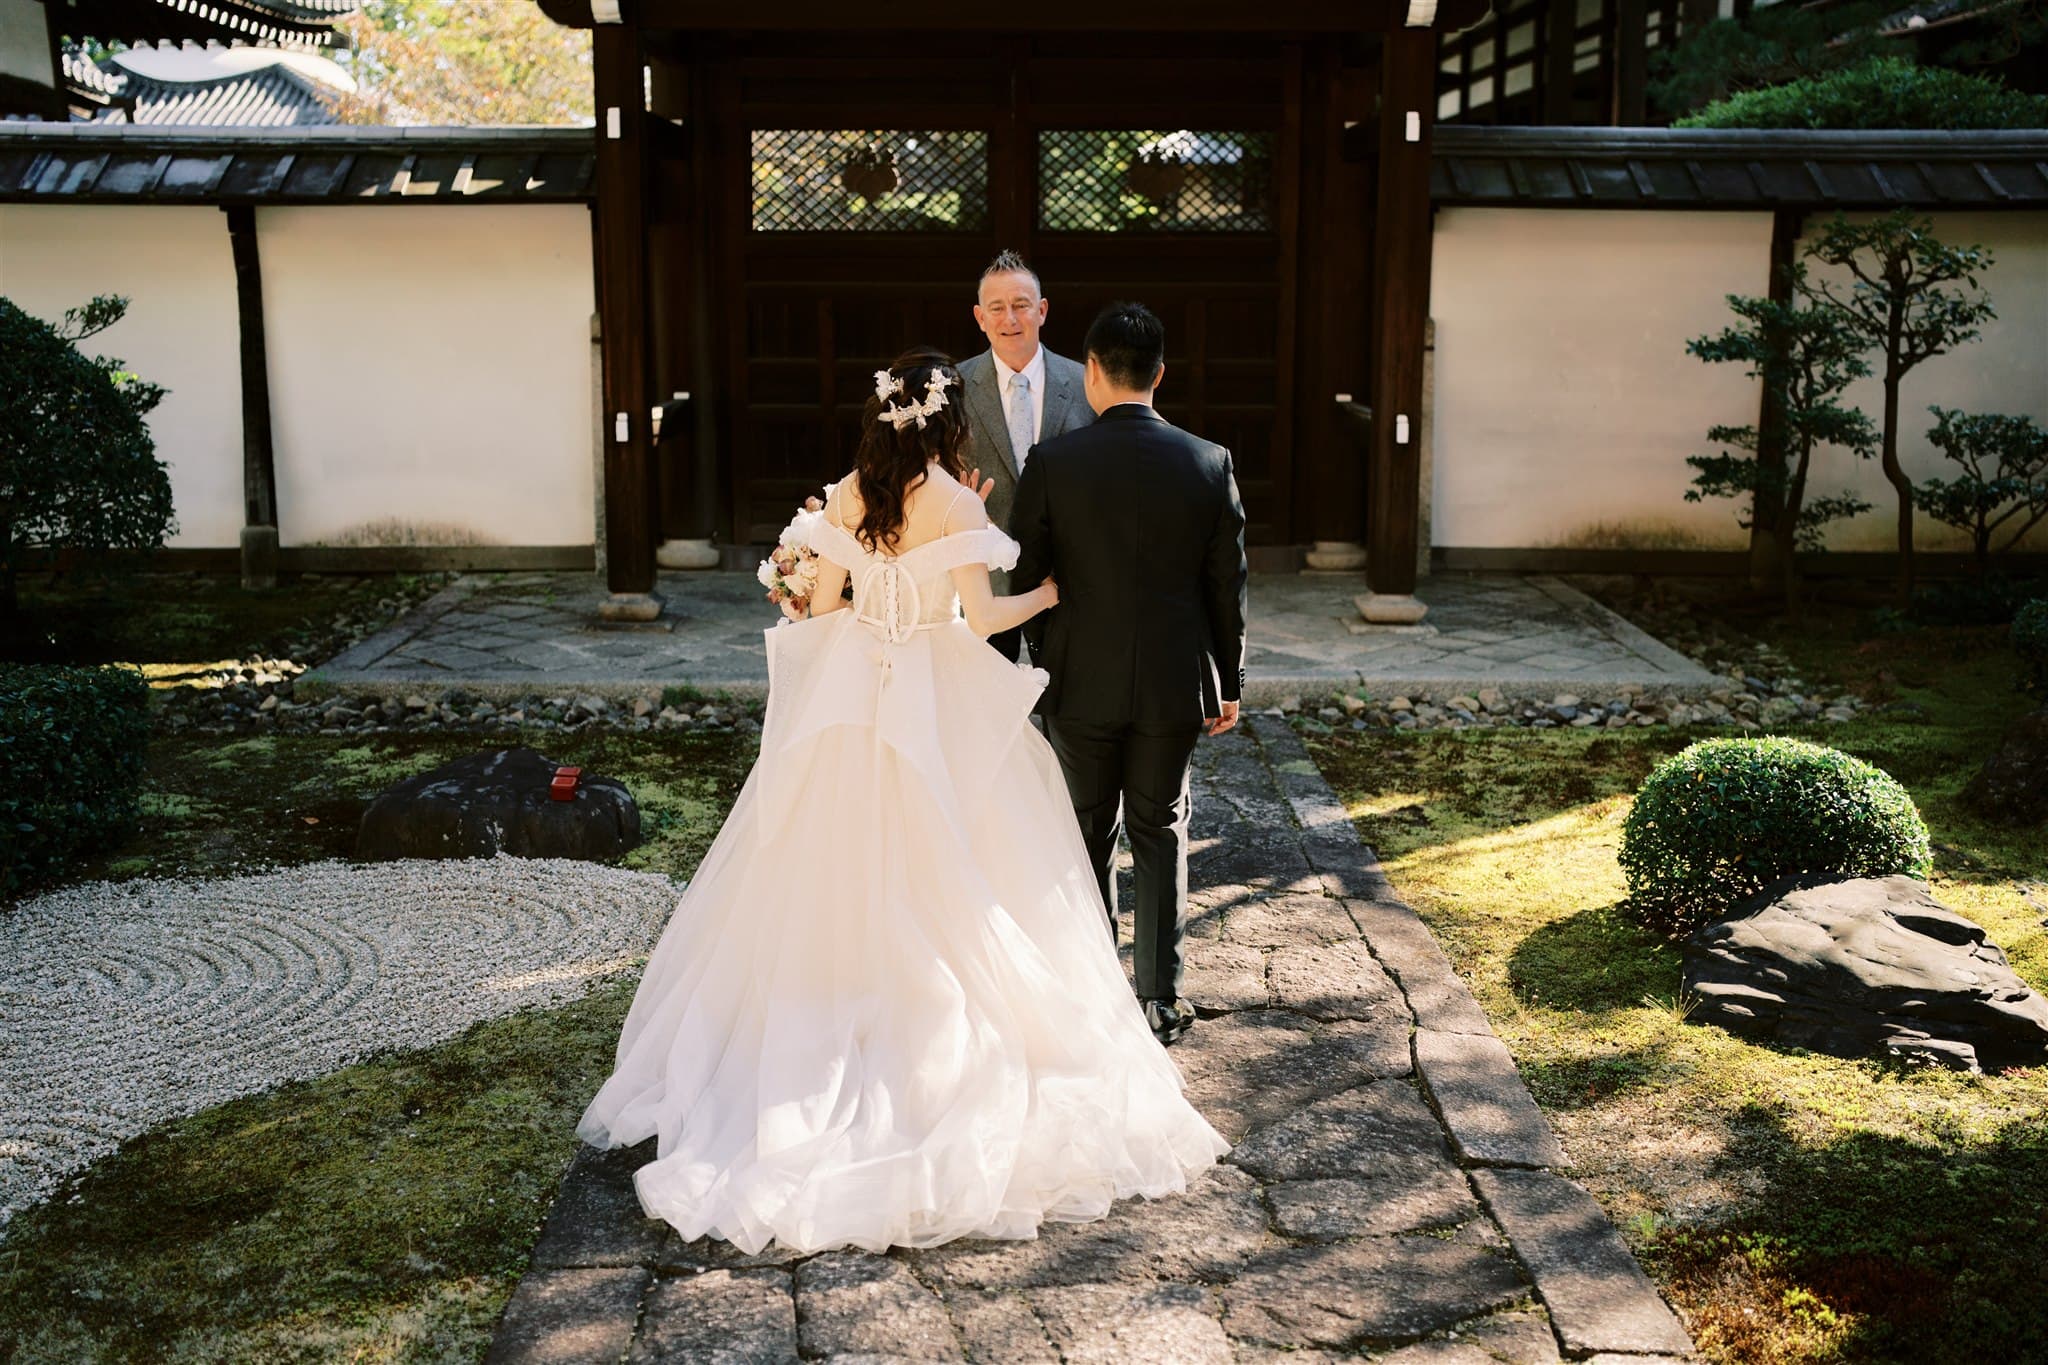 Kyoto Tokyo Japan Elopement Wedding Photographer, Planner & Videographer | A Japan elopement photographer captures beautiful moments of a bride and groom walking through a serene Japanese garden.